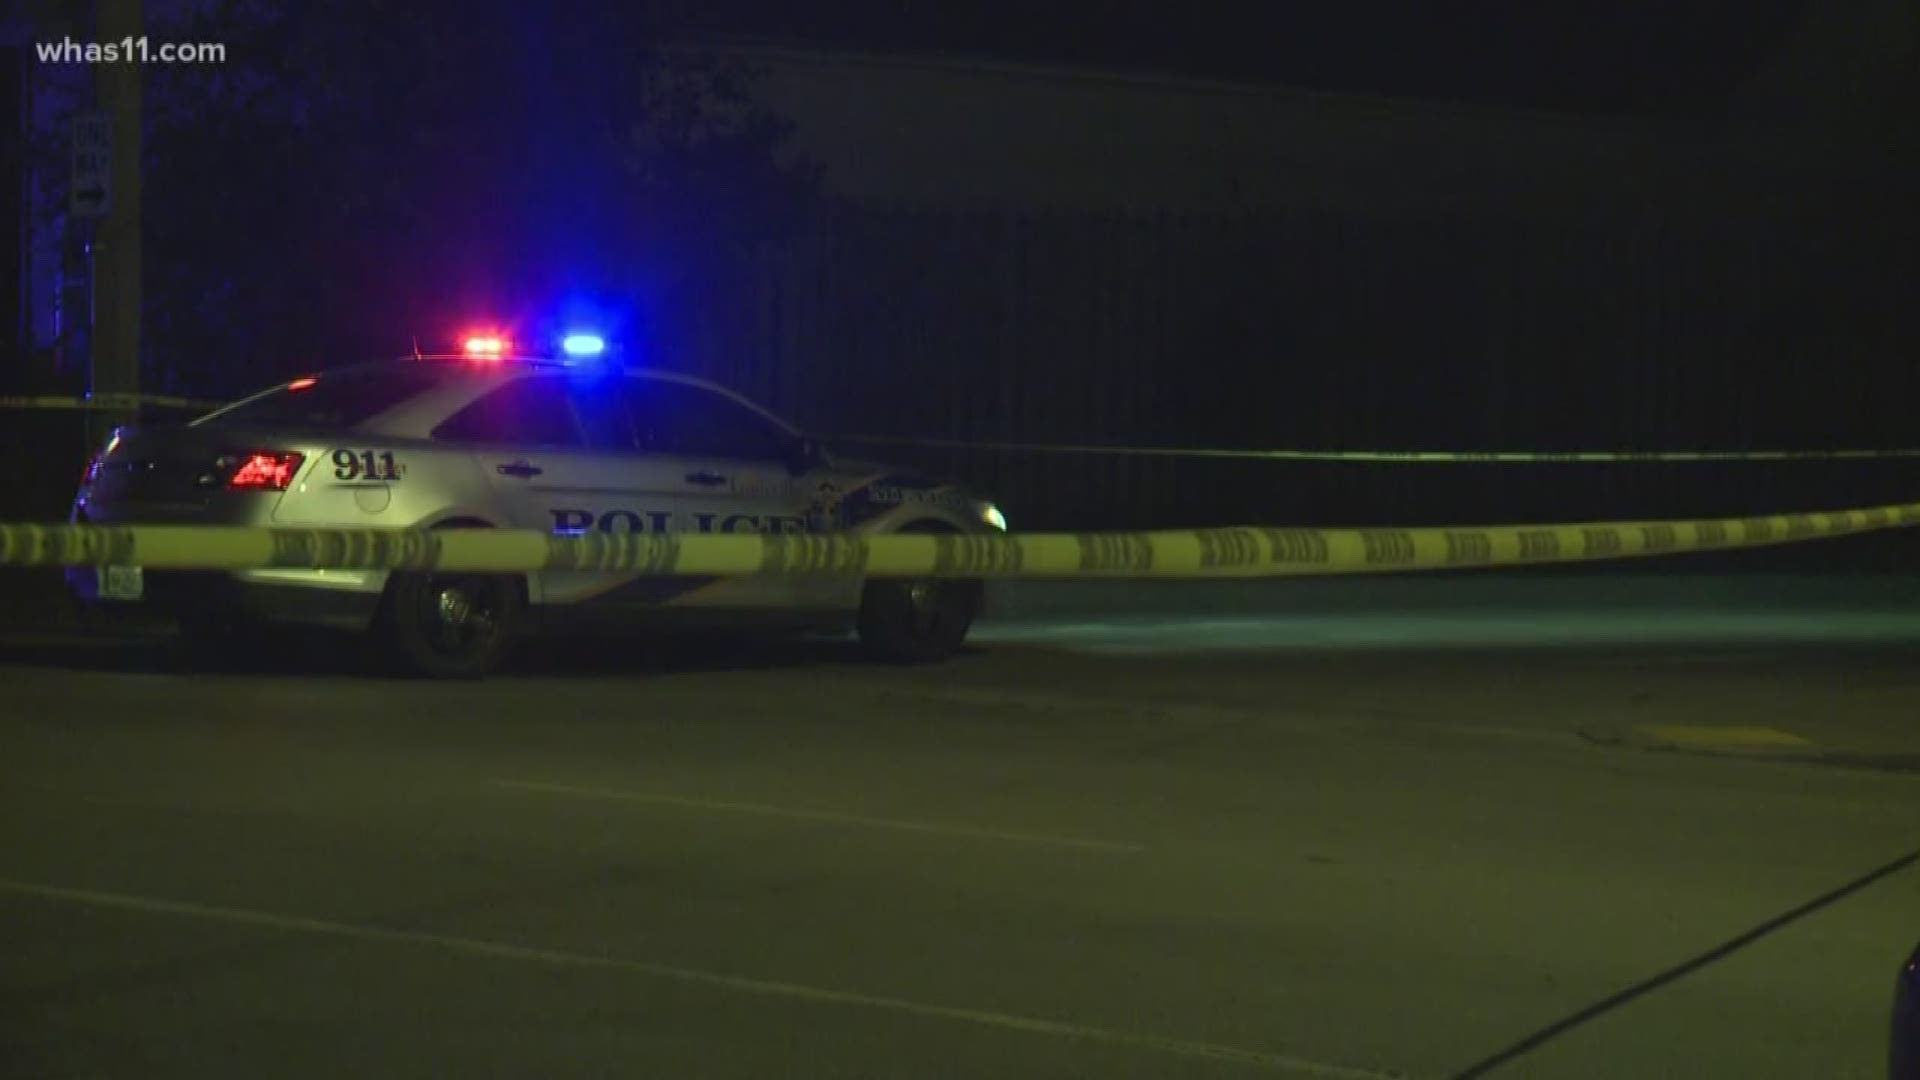 Police are investigating after a man was killed early Wednesday morning